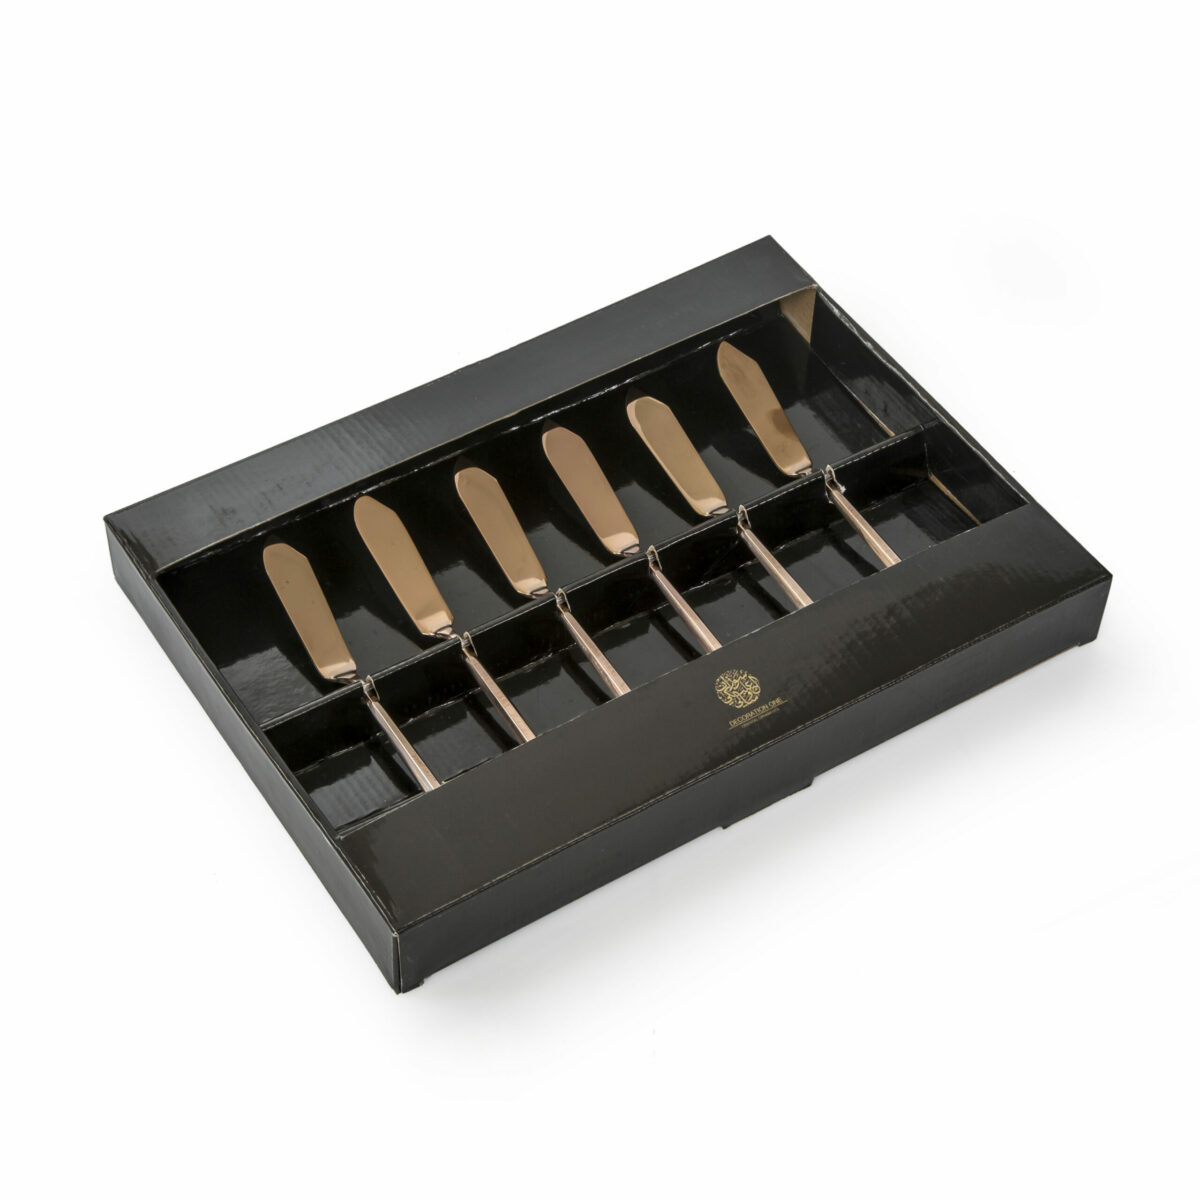 A set of rose-gold color stainless steal cutlery, comes with 6 pieces of butter knives.